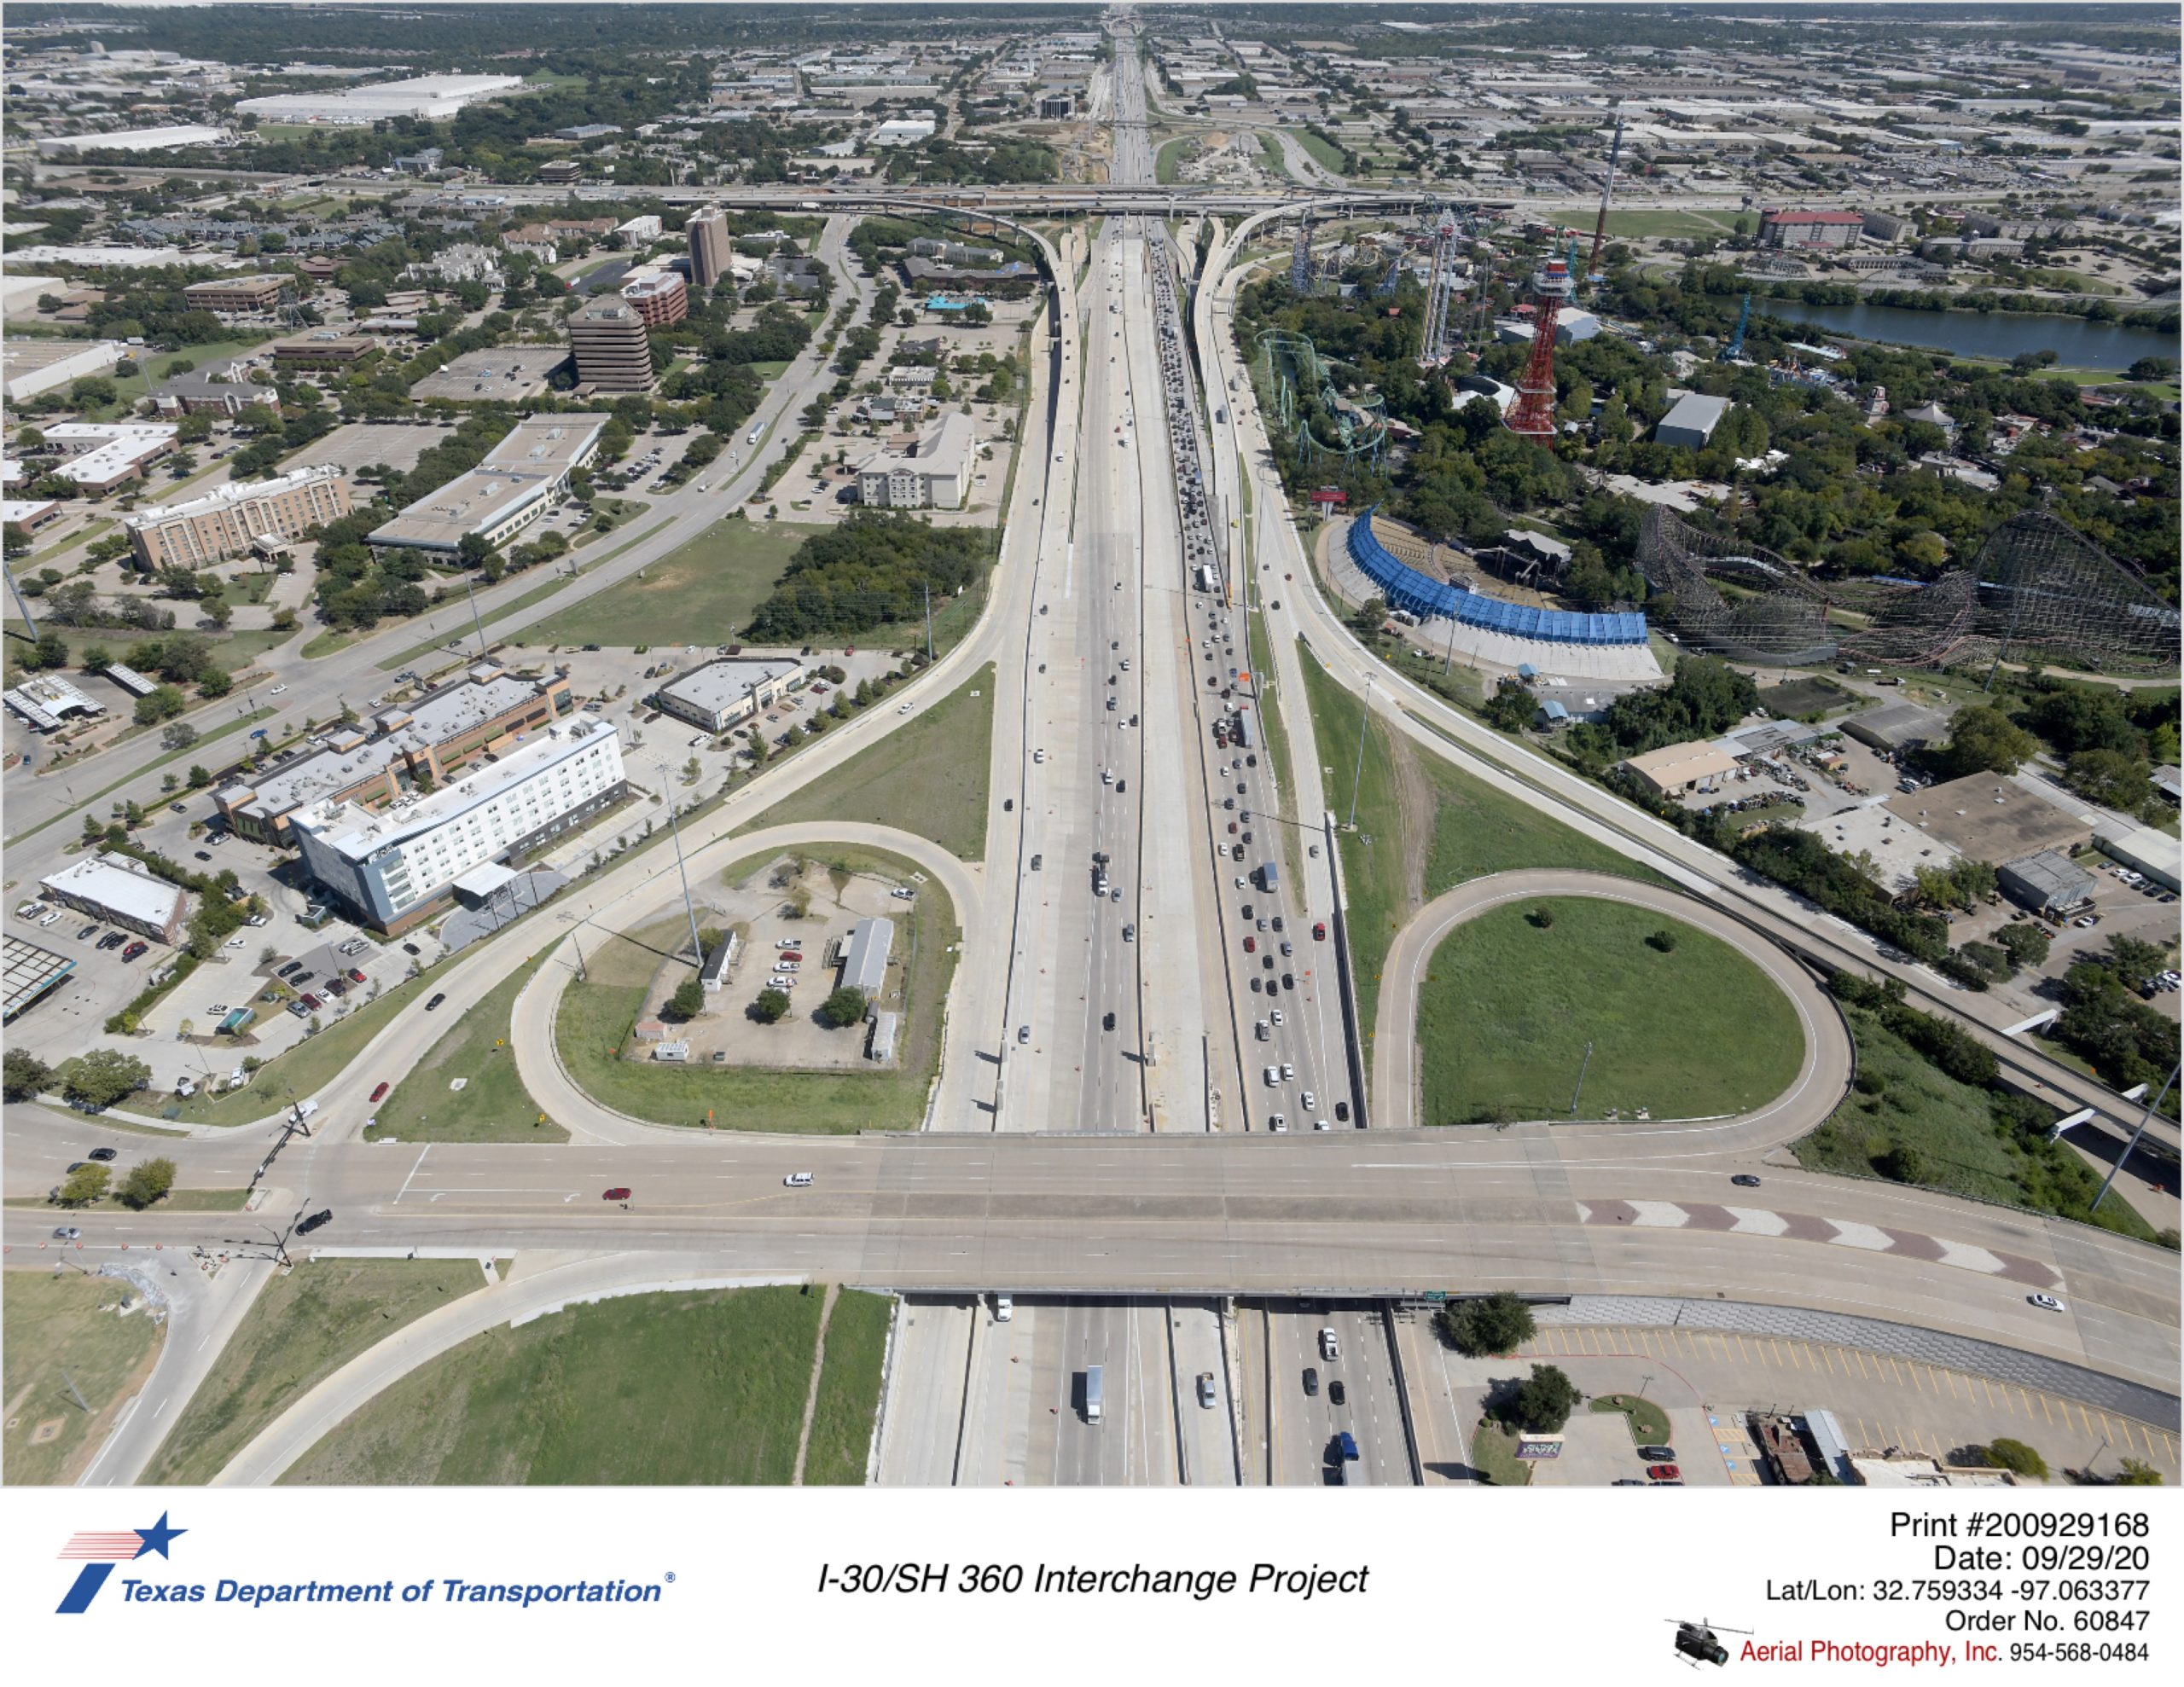 I-30 looking east with Ballpark Way interchange in foreground. Shows new eastbound exit to Six Flags Dr and direct connector ramps on west side of interchange.